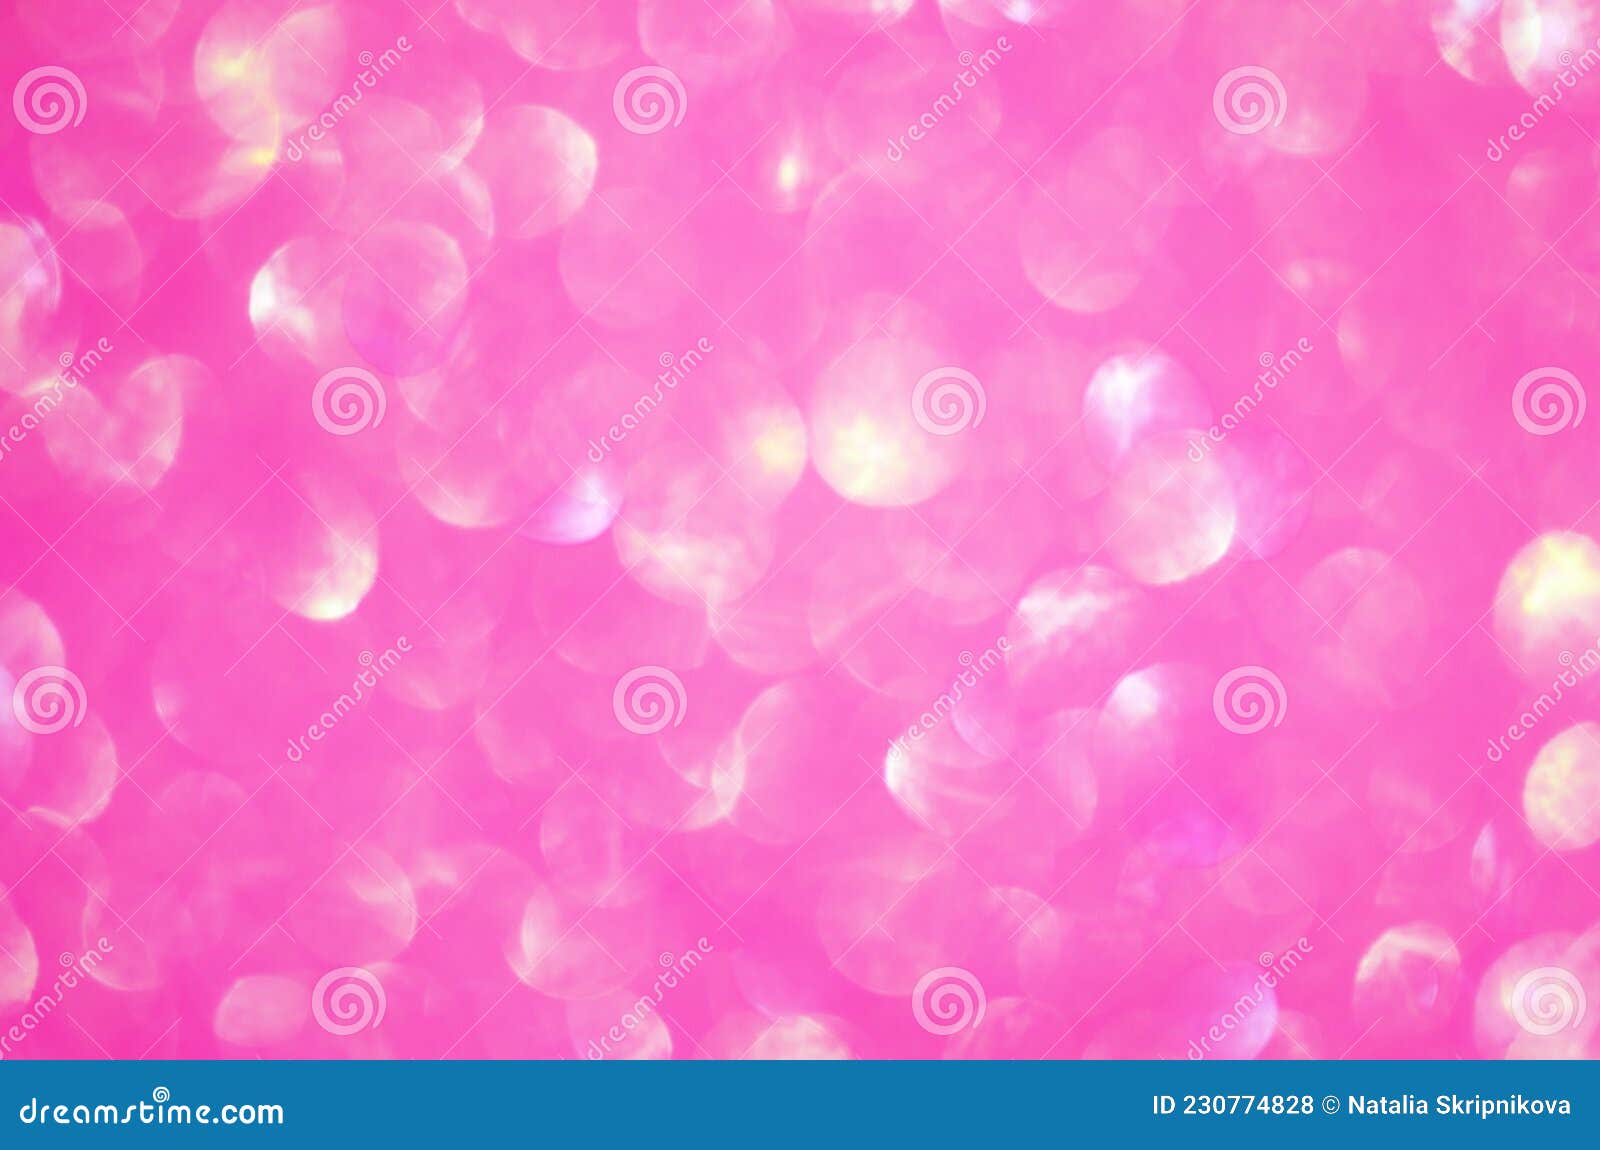 Unfocused Lights on a Pink Background. Abstract Pattern Stock Photo ...